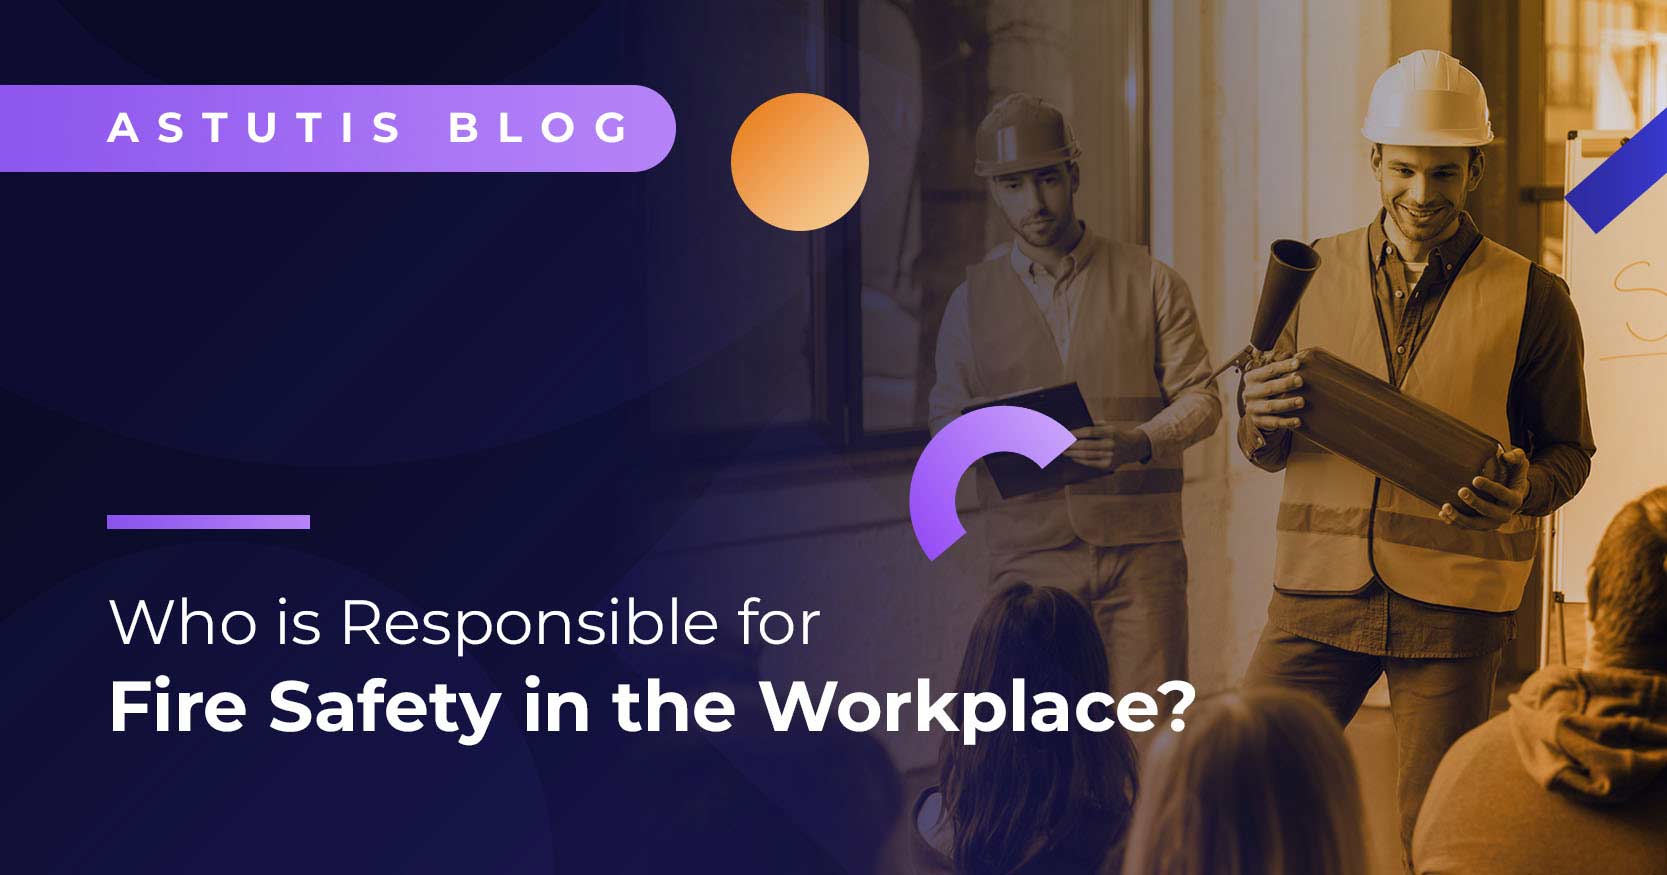 Who is Responsible for Fire Safety in the Workplace? Image